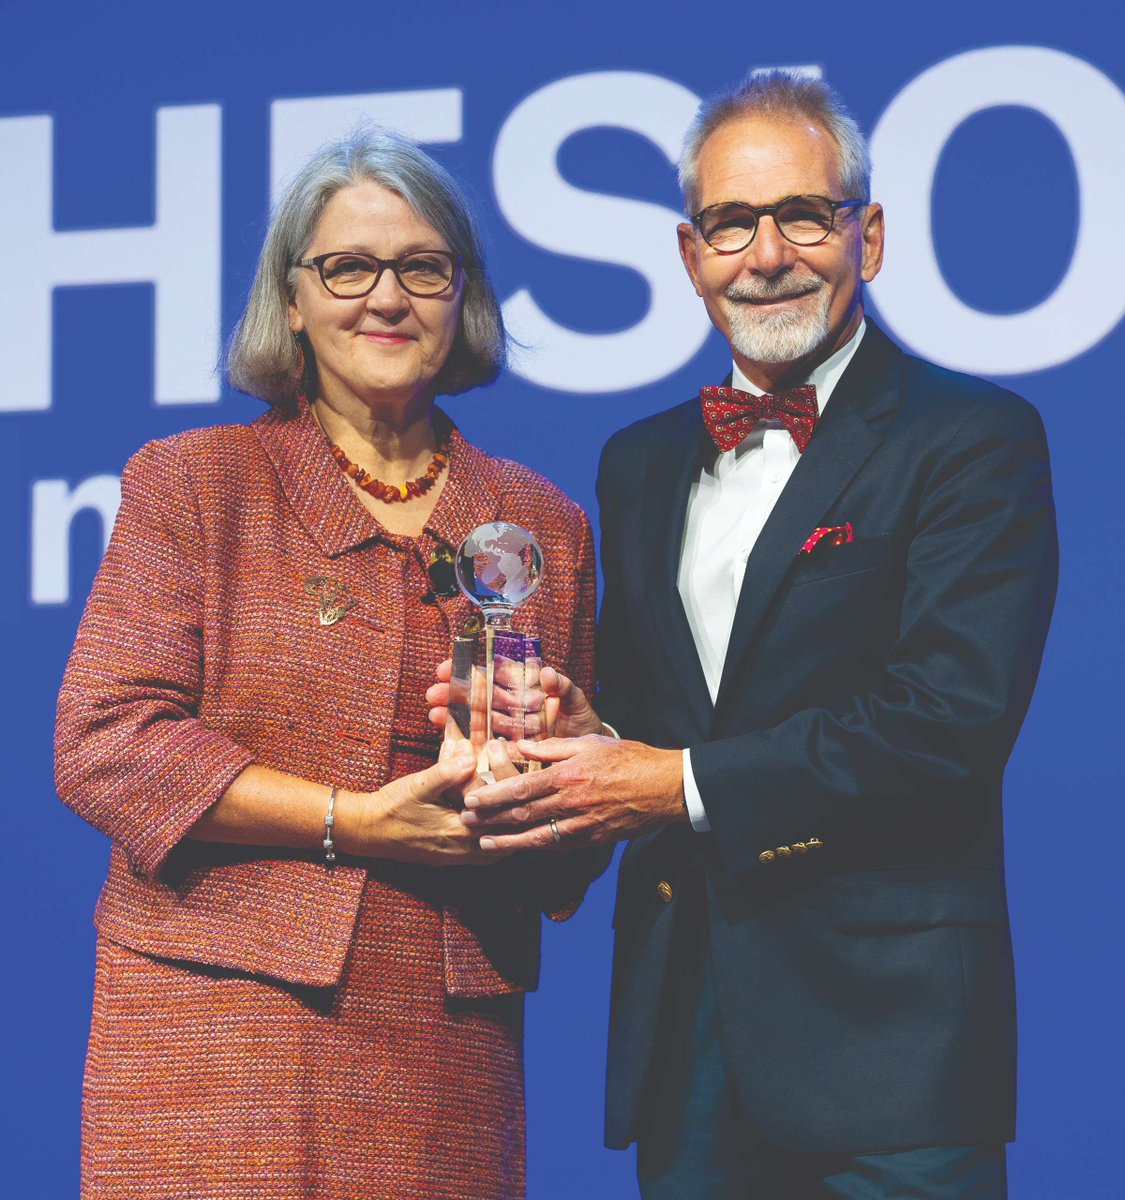 We are now accepting nominations for the ASA Nicholas Greene, MD Award for Outstanding Humanitarian Contribution. Find more information and complete a nomination form: ow.ly/kZKA50R5GWM #anesthesiologist #anesthesiology